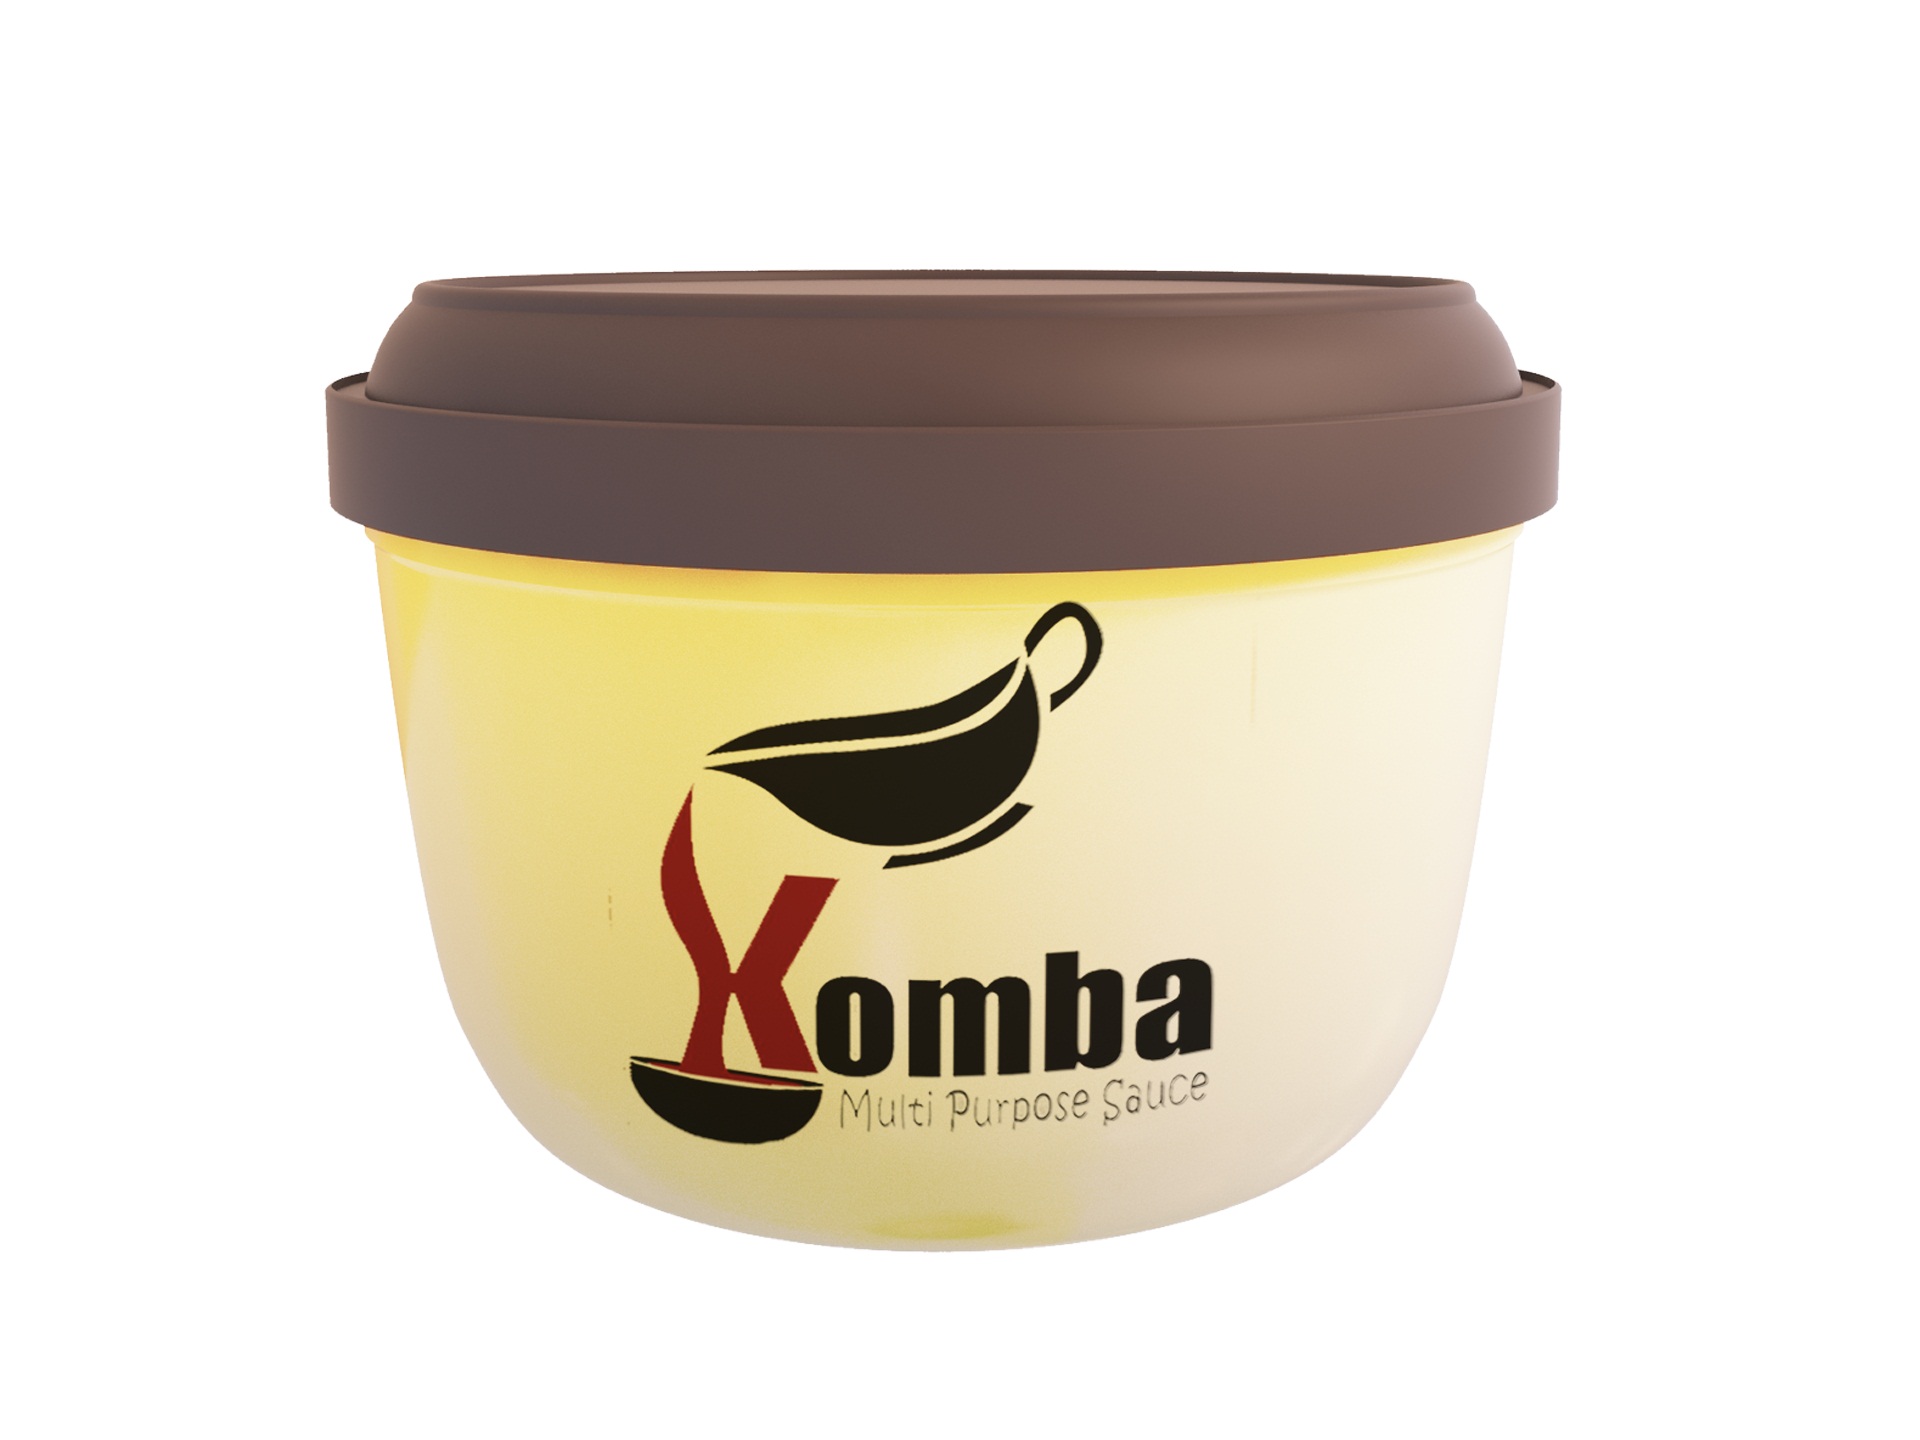 The Komba Multi-Purpose Sauce makes home cooked meals even more special